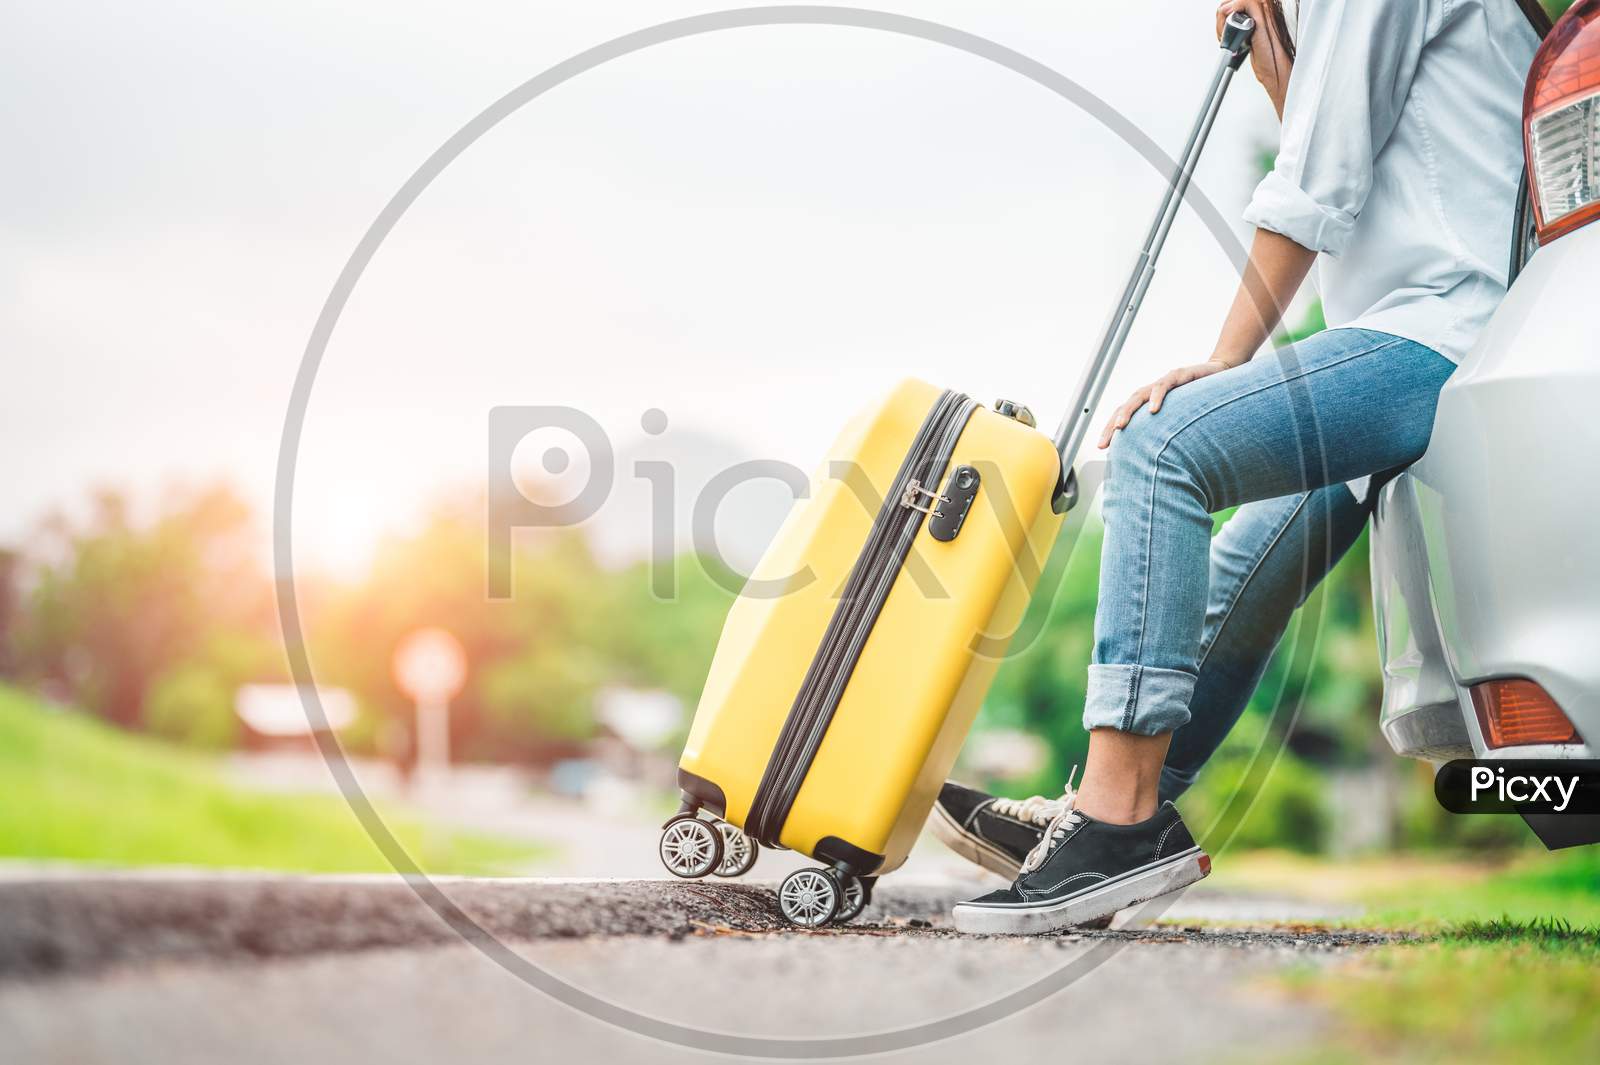 Closeup Lower Body Of Woman Leg Relaxing On Car Trunk With Trolly Luggage Along Road Trip With Autumn Mountain Hill Background. Freedom Road Way. People Lifestyle Transportation Travel In Vacation